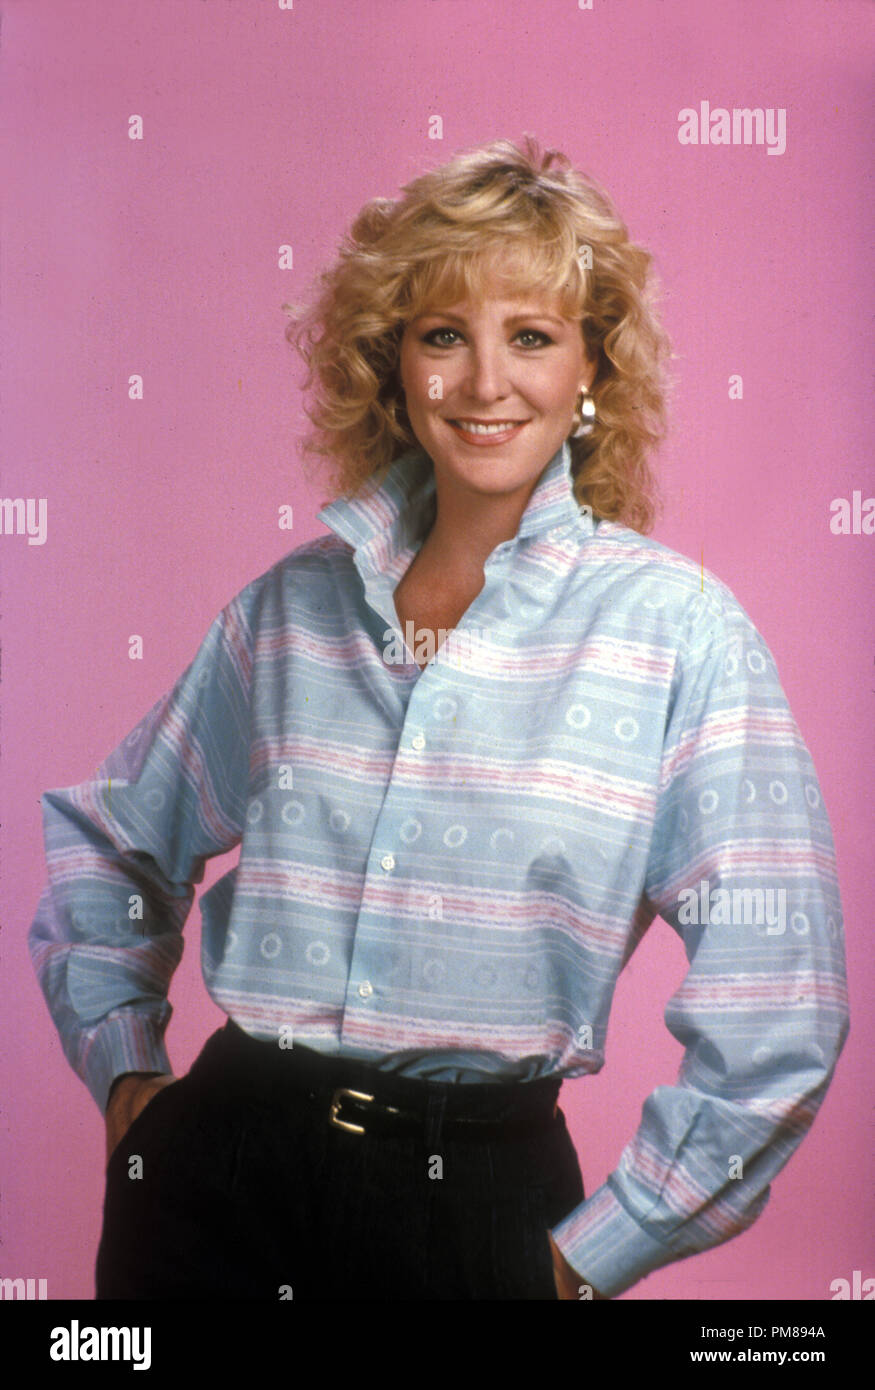 studio-publicity-still-from-growing-pains-joanna-kerns-circa-1983-all-rights-reserved-file-reference-31706305tha-for-editorial-use-only-PM894A.jpg